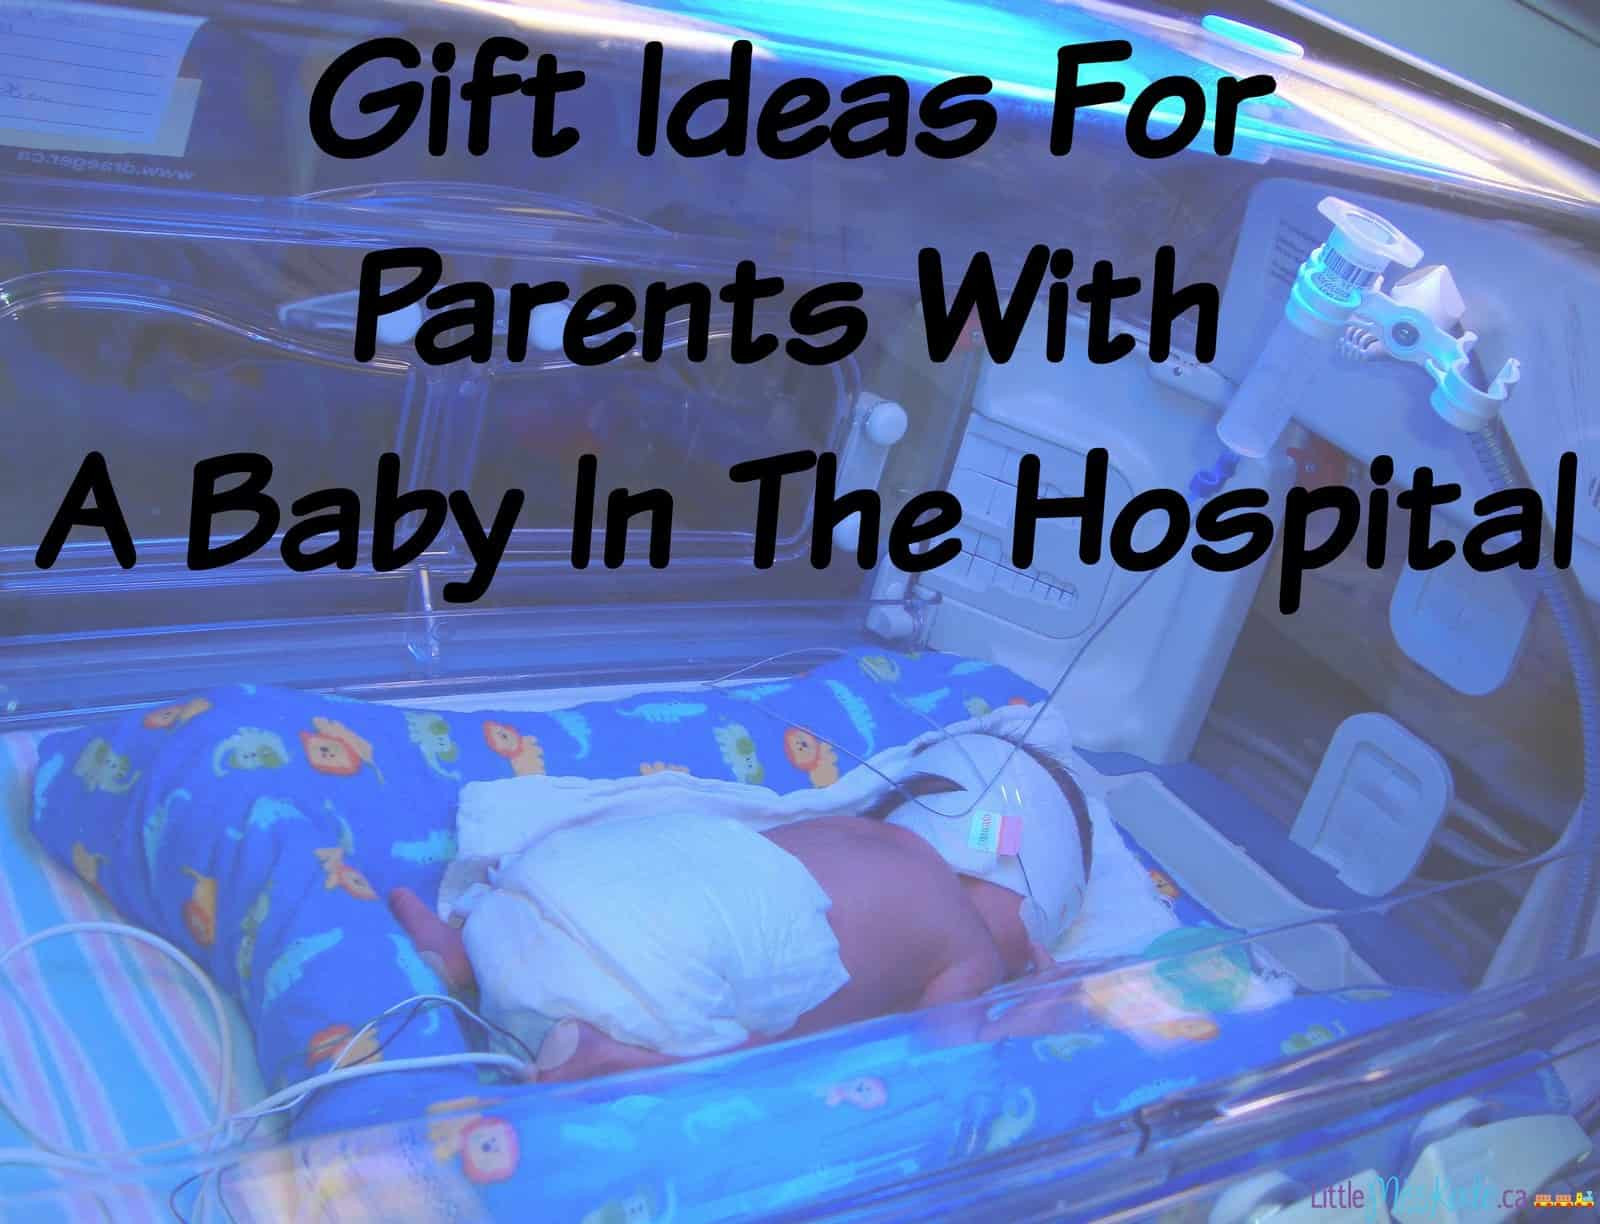 Gift Ideas For Family With New Baby
 Gift Ideas For Parents With A Baby In The Hospital